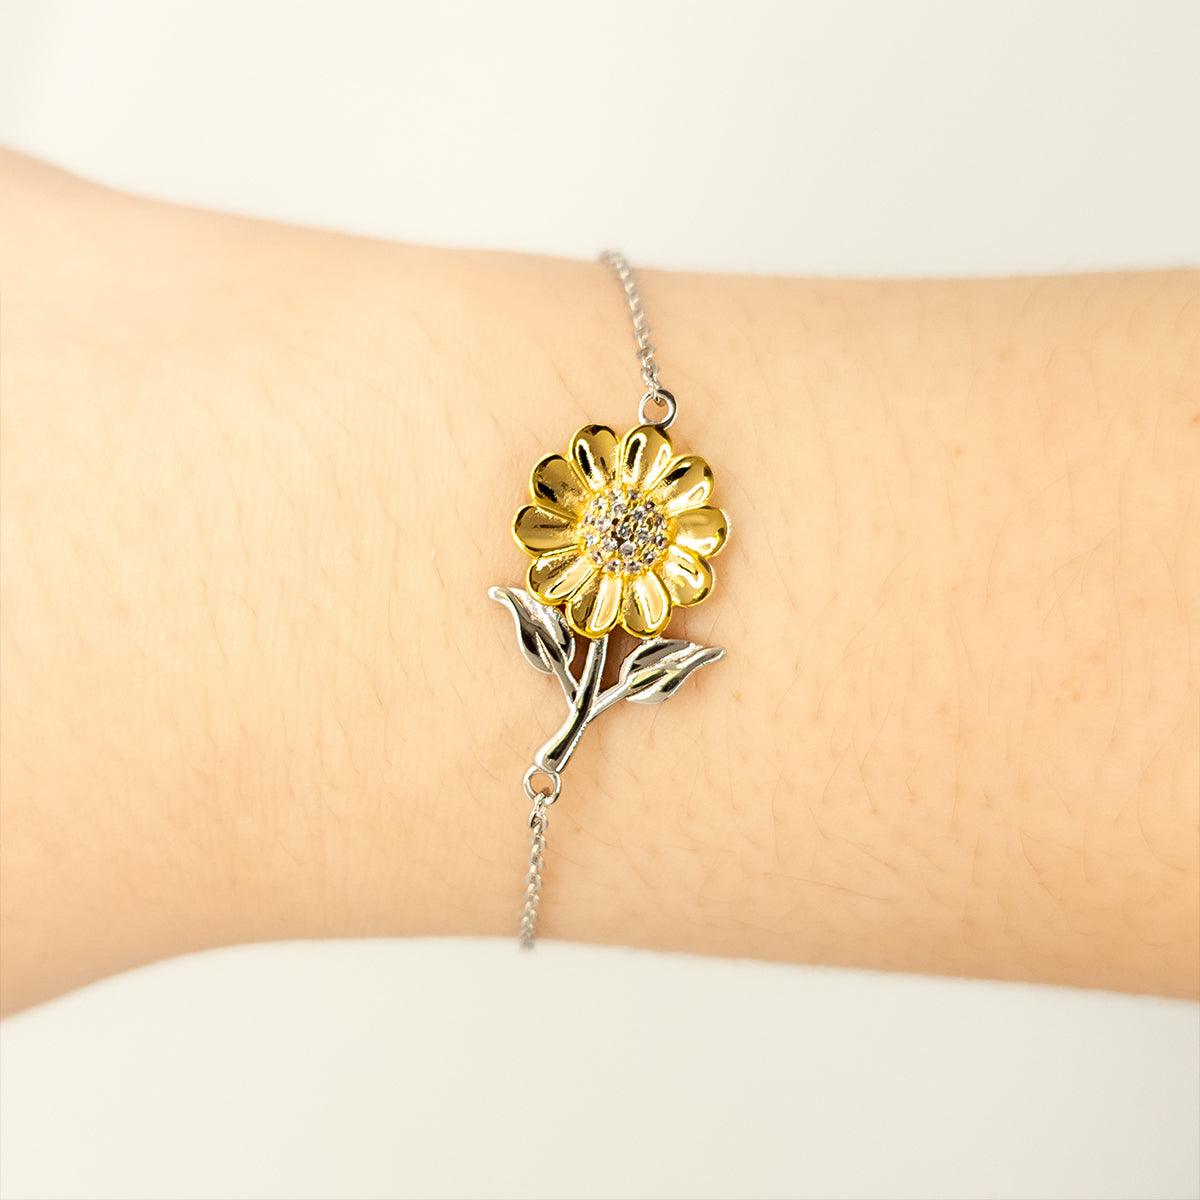 Husband Sunflower Bracelet Gifts, To My Husband You are braver than you believe, stronger than you seem, Inspirational Gifts For Husband Card, Birthday, Christmas Gifts For Husband Men Women - Mallard Moon Gift Shop